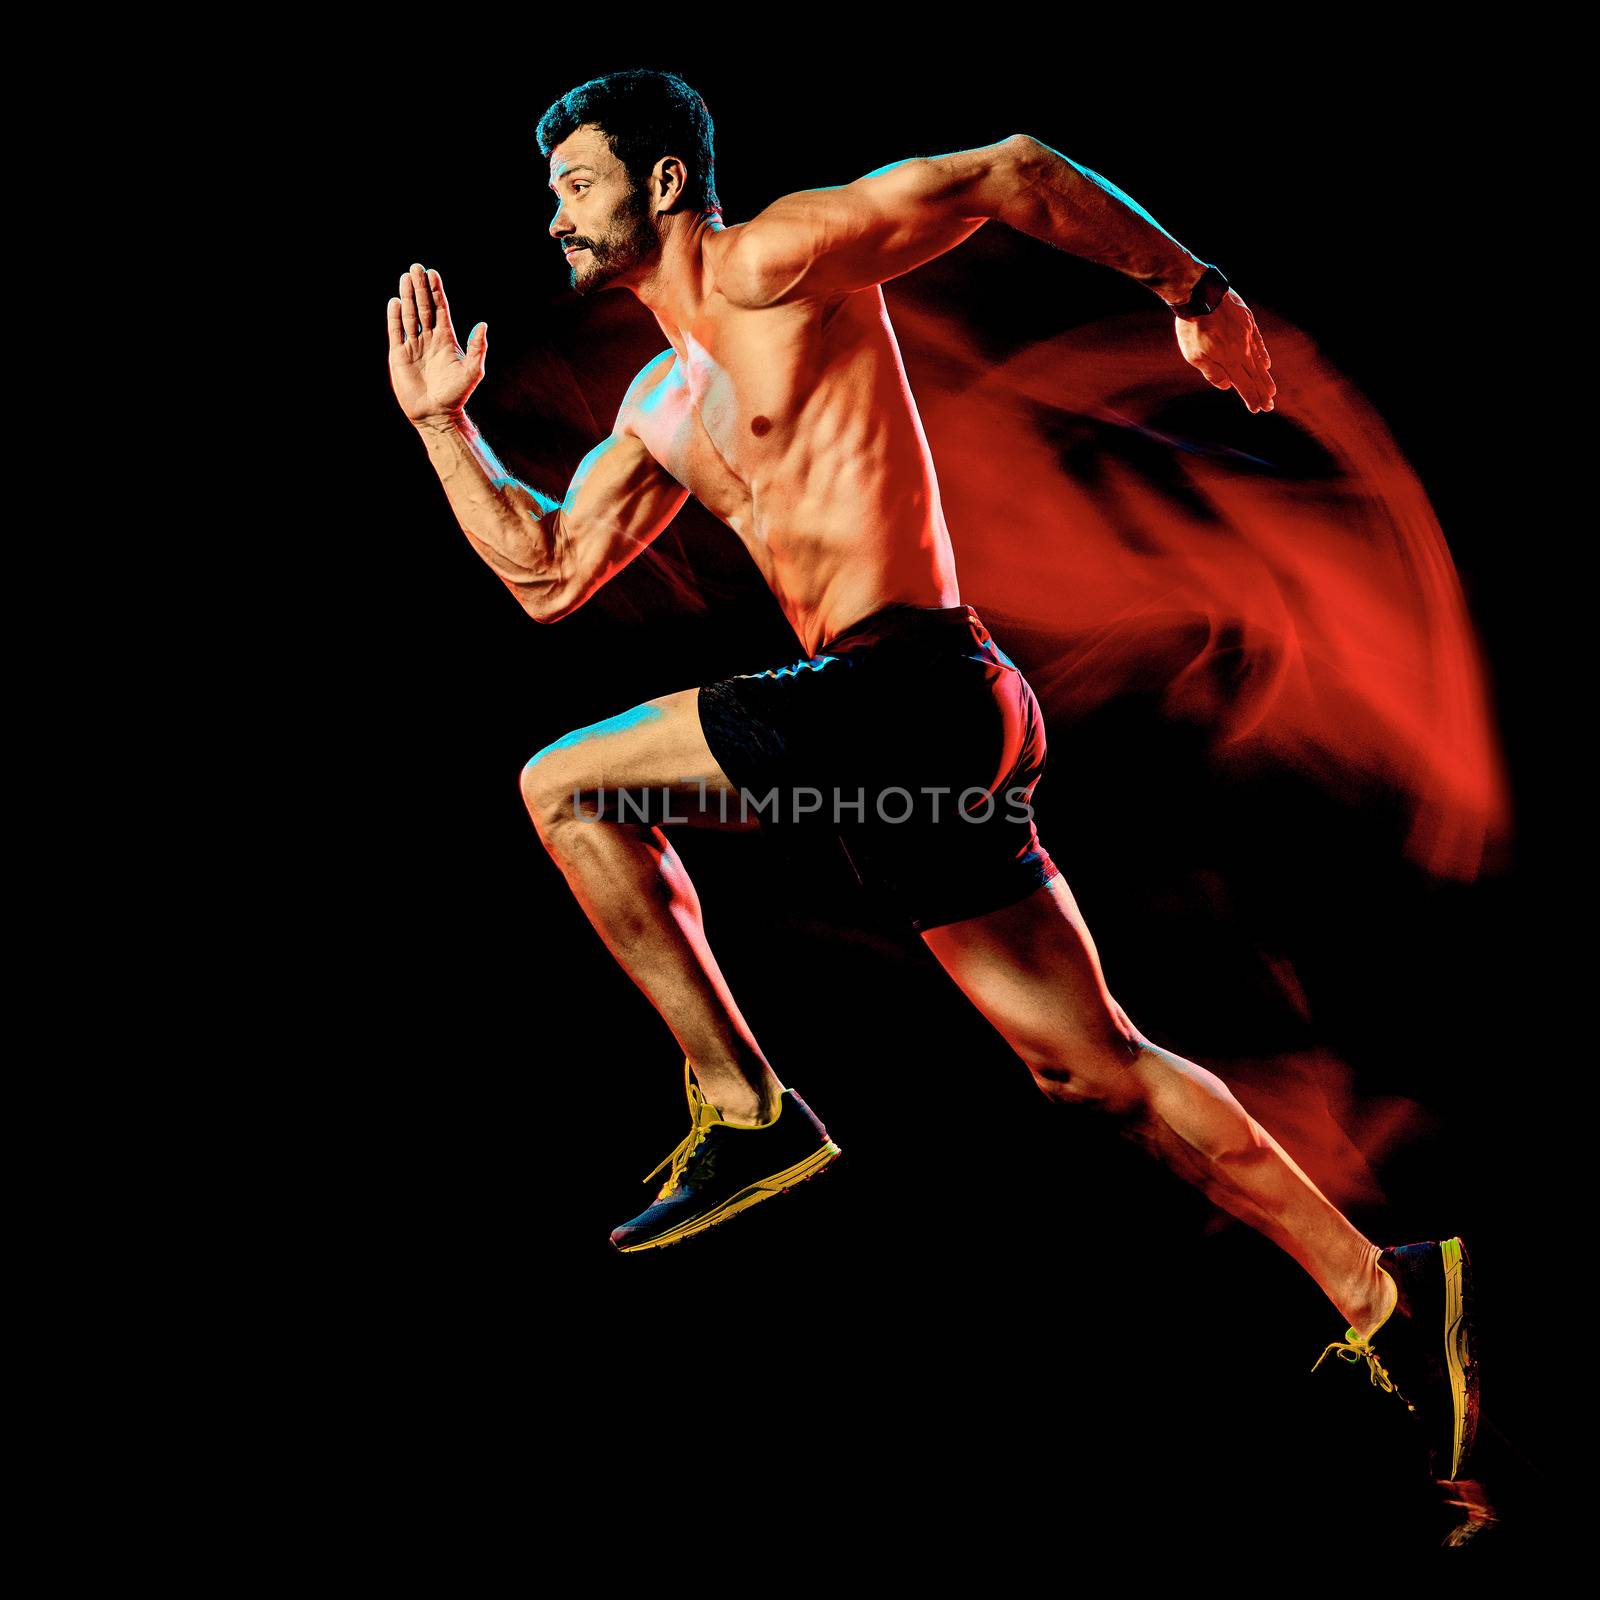 one caucasian topless muscular mature man runner. running jogger jogging isolated on black background with light painting speed mouvement effect